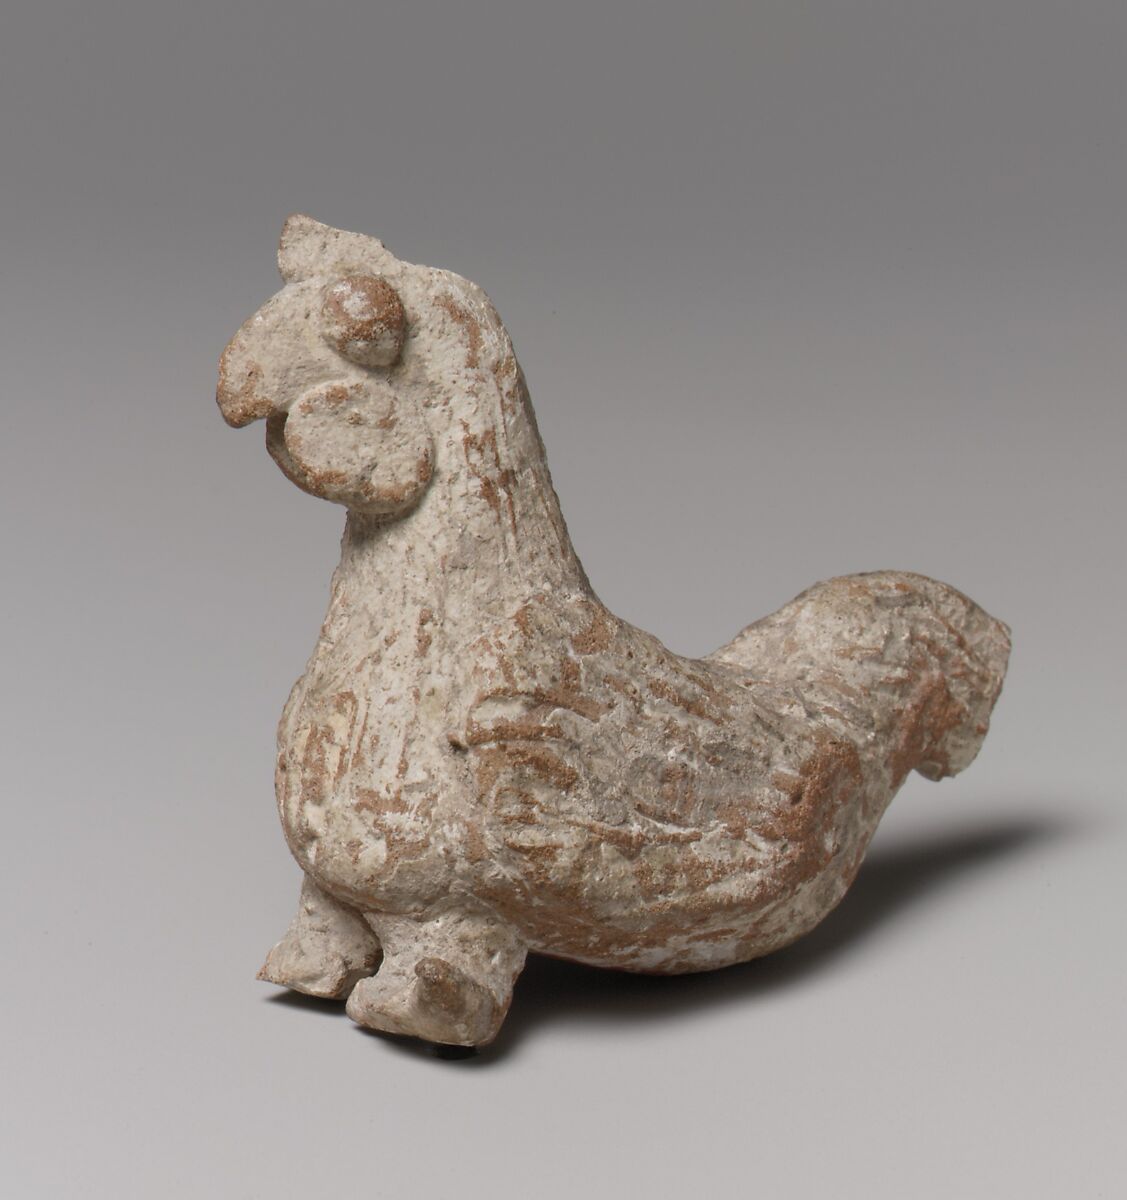 Terracotta statuette of a rooster, Terracotta, Greek, Cypriot 